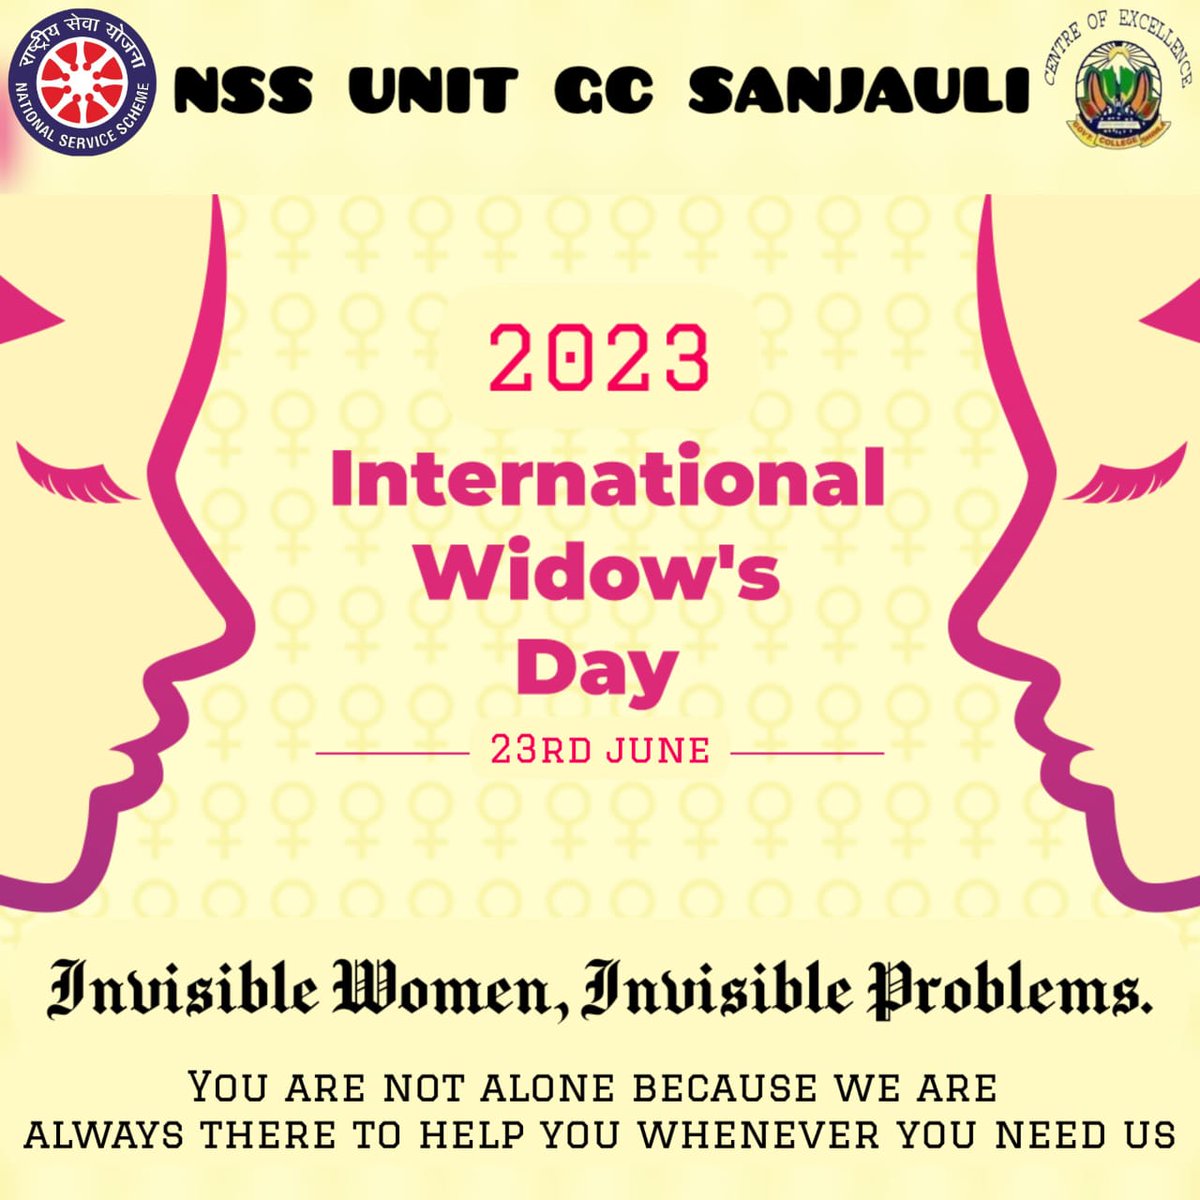 Every year June 23 is observed as International Widows Day to raise awareness of the issue faced by widows .
@Anurag_Office @ianuragthakur @NSSChennai @NSSRDChandigarh @NssrdD @PMOIndia @HimachalNss @_NSSIndia @_NSSAwards @ConnectingNss